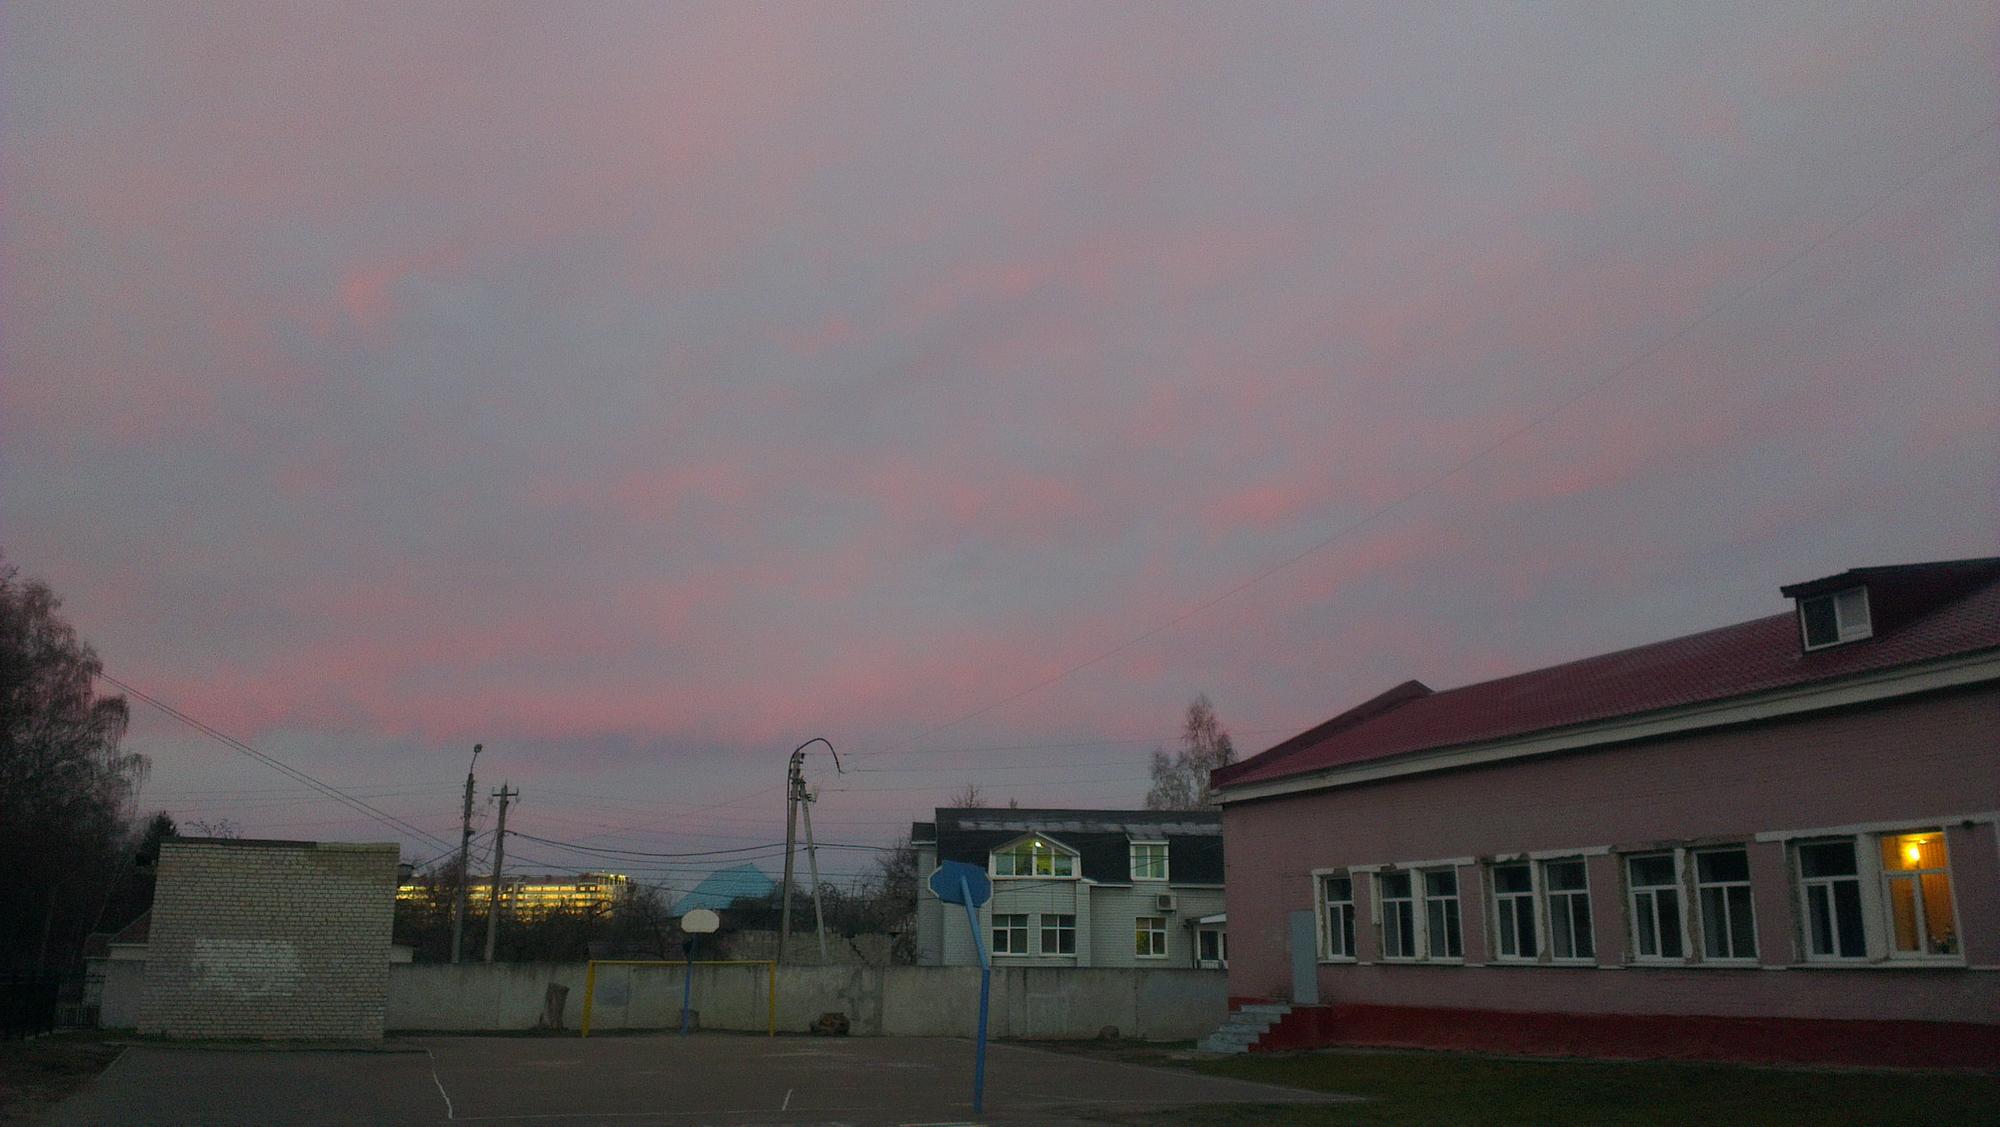 Pink cotton candy in the sky